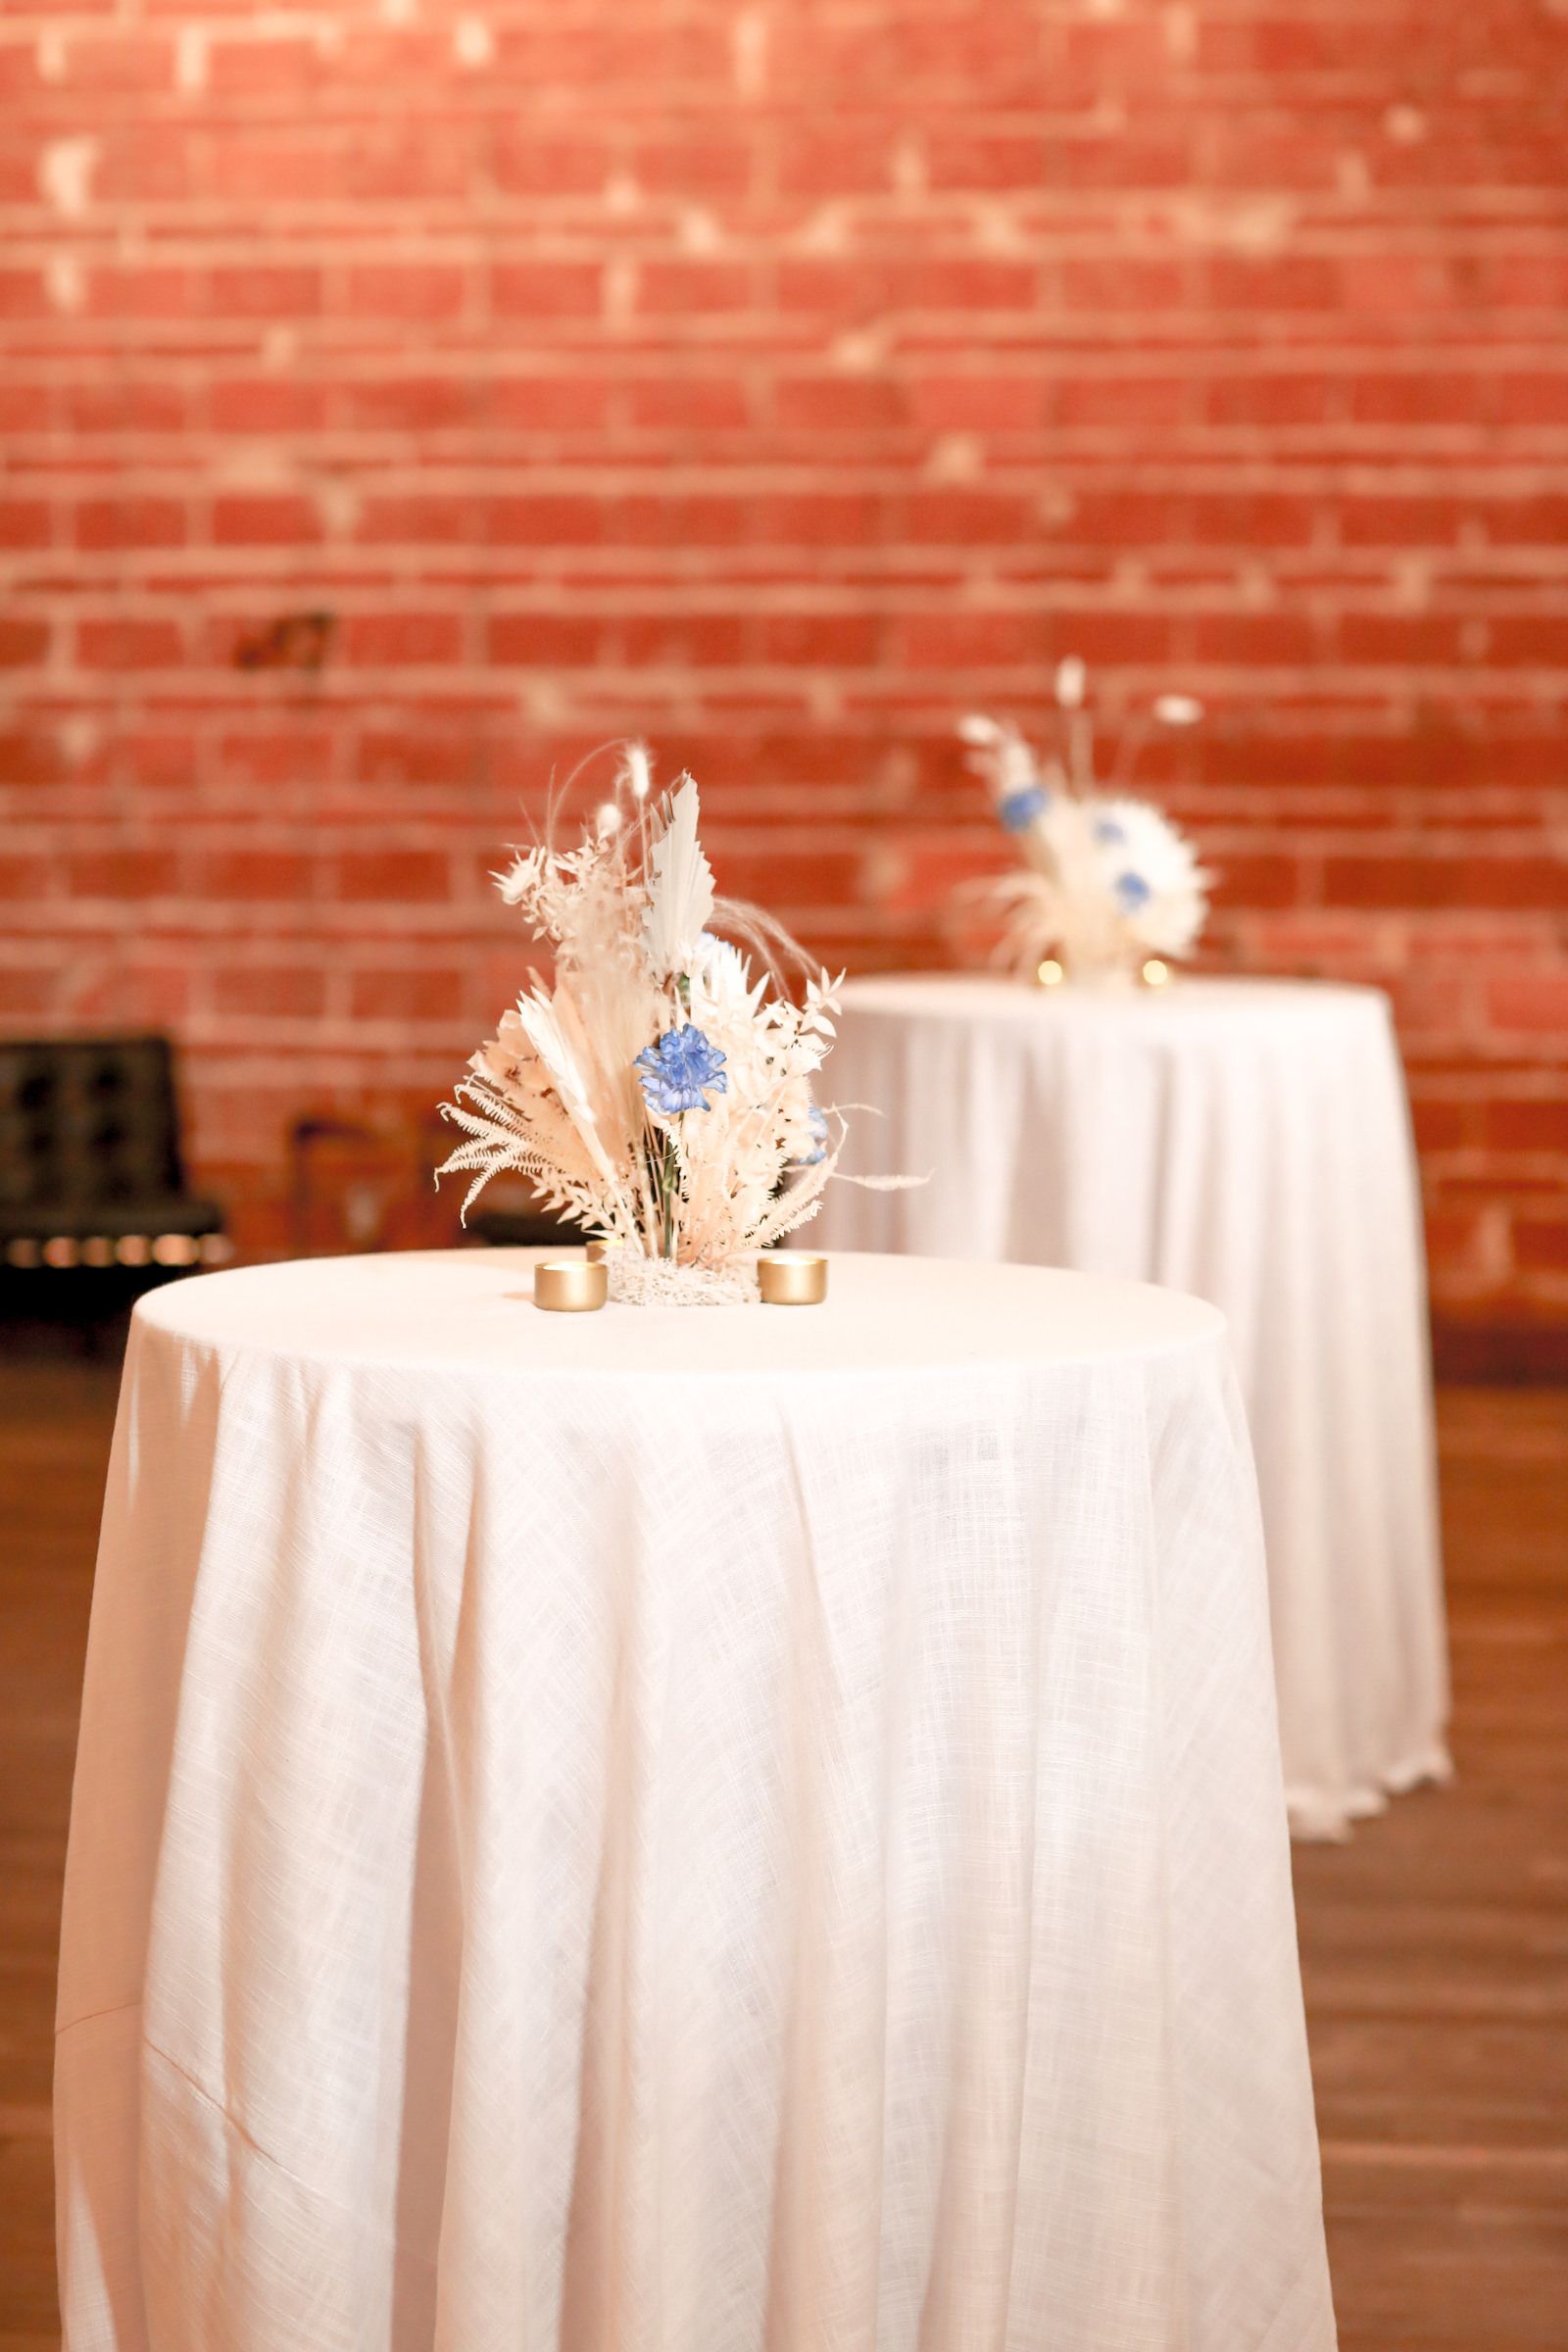 Tall Cocktail Tables with White Table Linens, Whimsical Wedding Reception Floral Centerpiece Decor, White Feathers and Blue Flowers, Red Brick Wall Backdrop | NOVA 535 | Over the Top Rental Linens | John Campbell Weddings